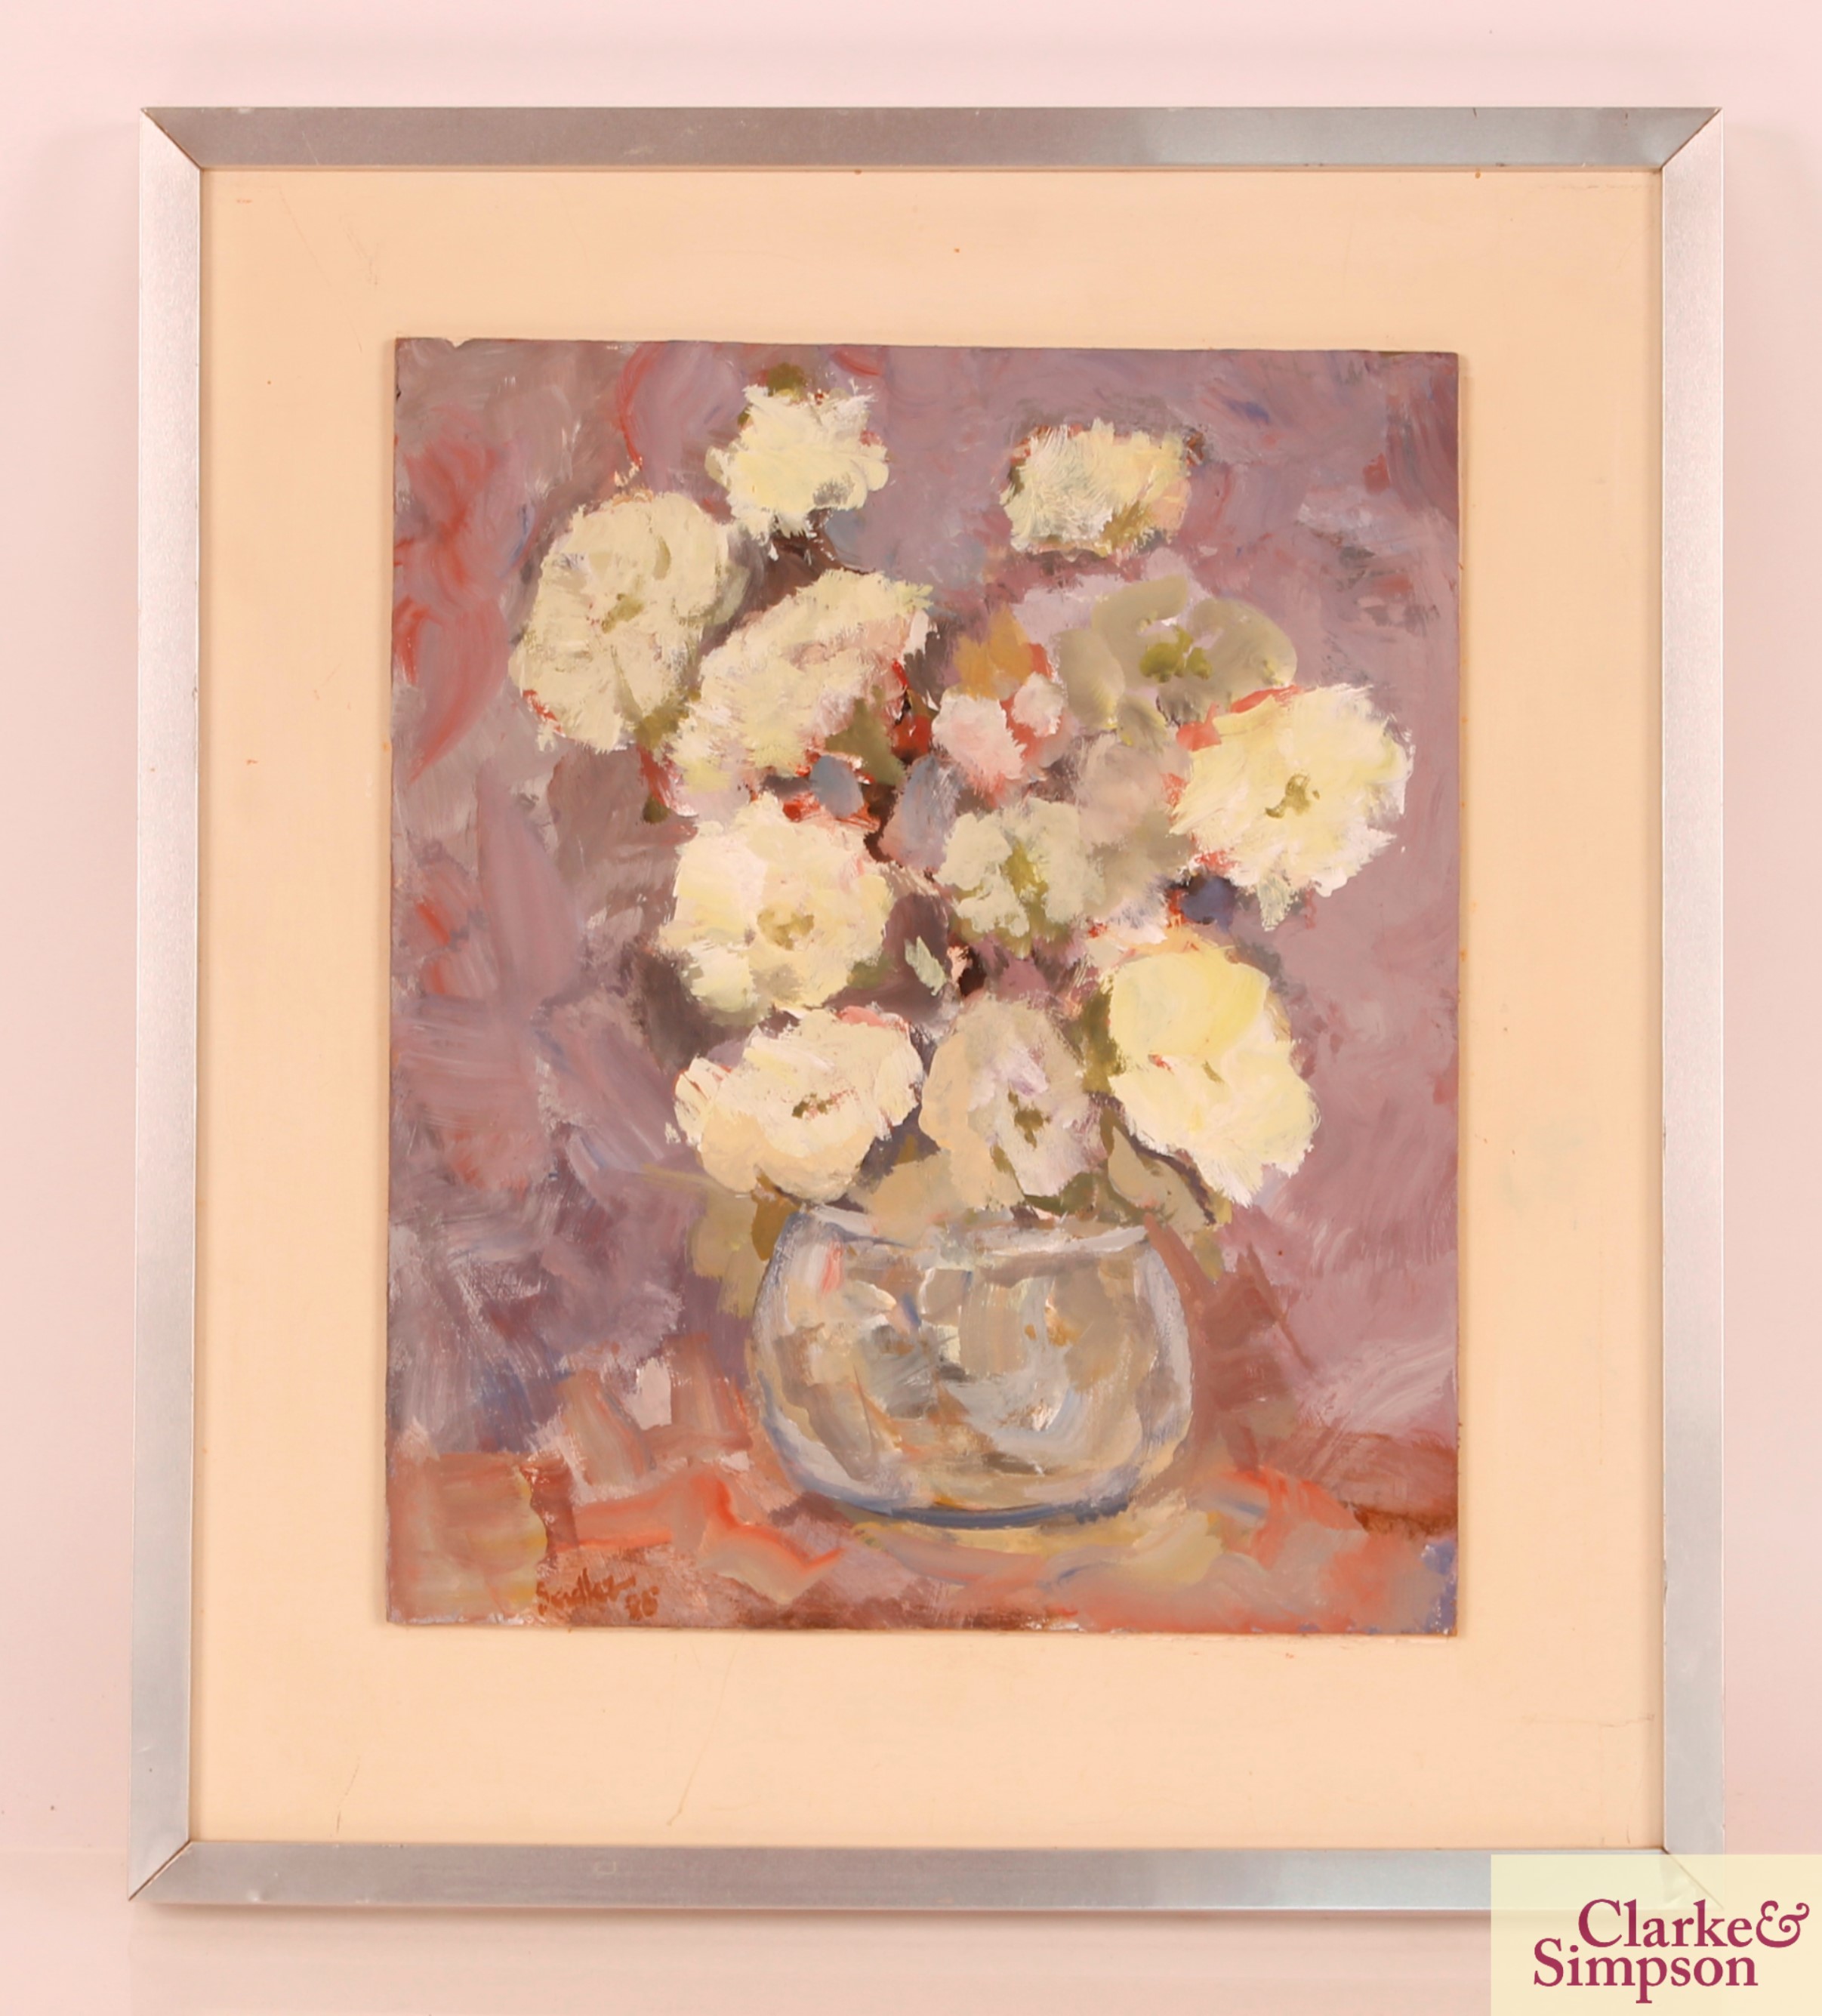 Robert Sadler, "Flowers In A Bowl" acrylic on boar - Image 2 of 2